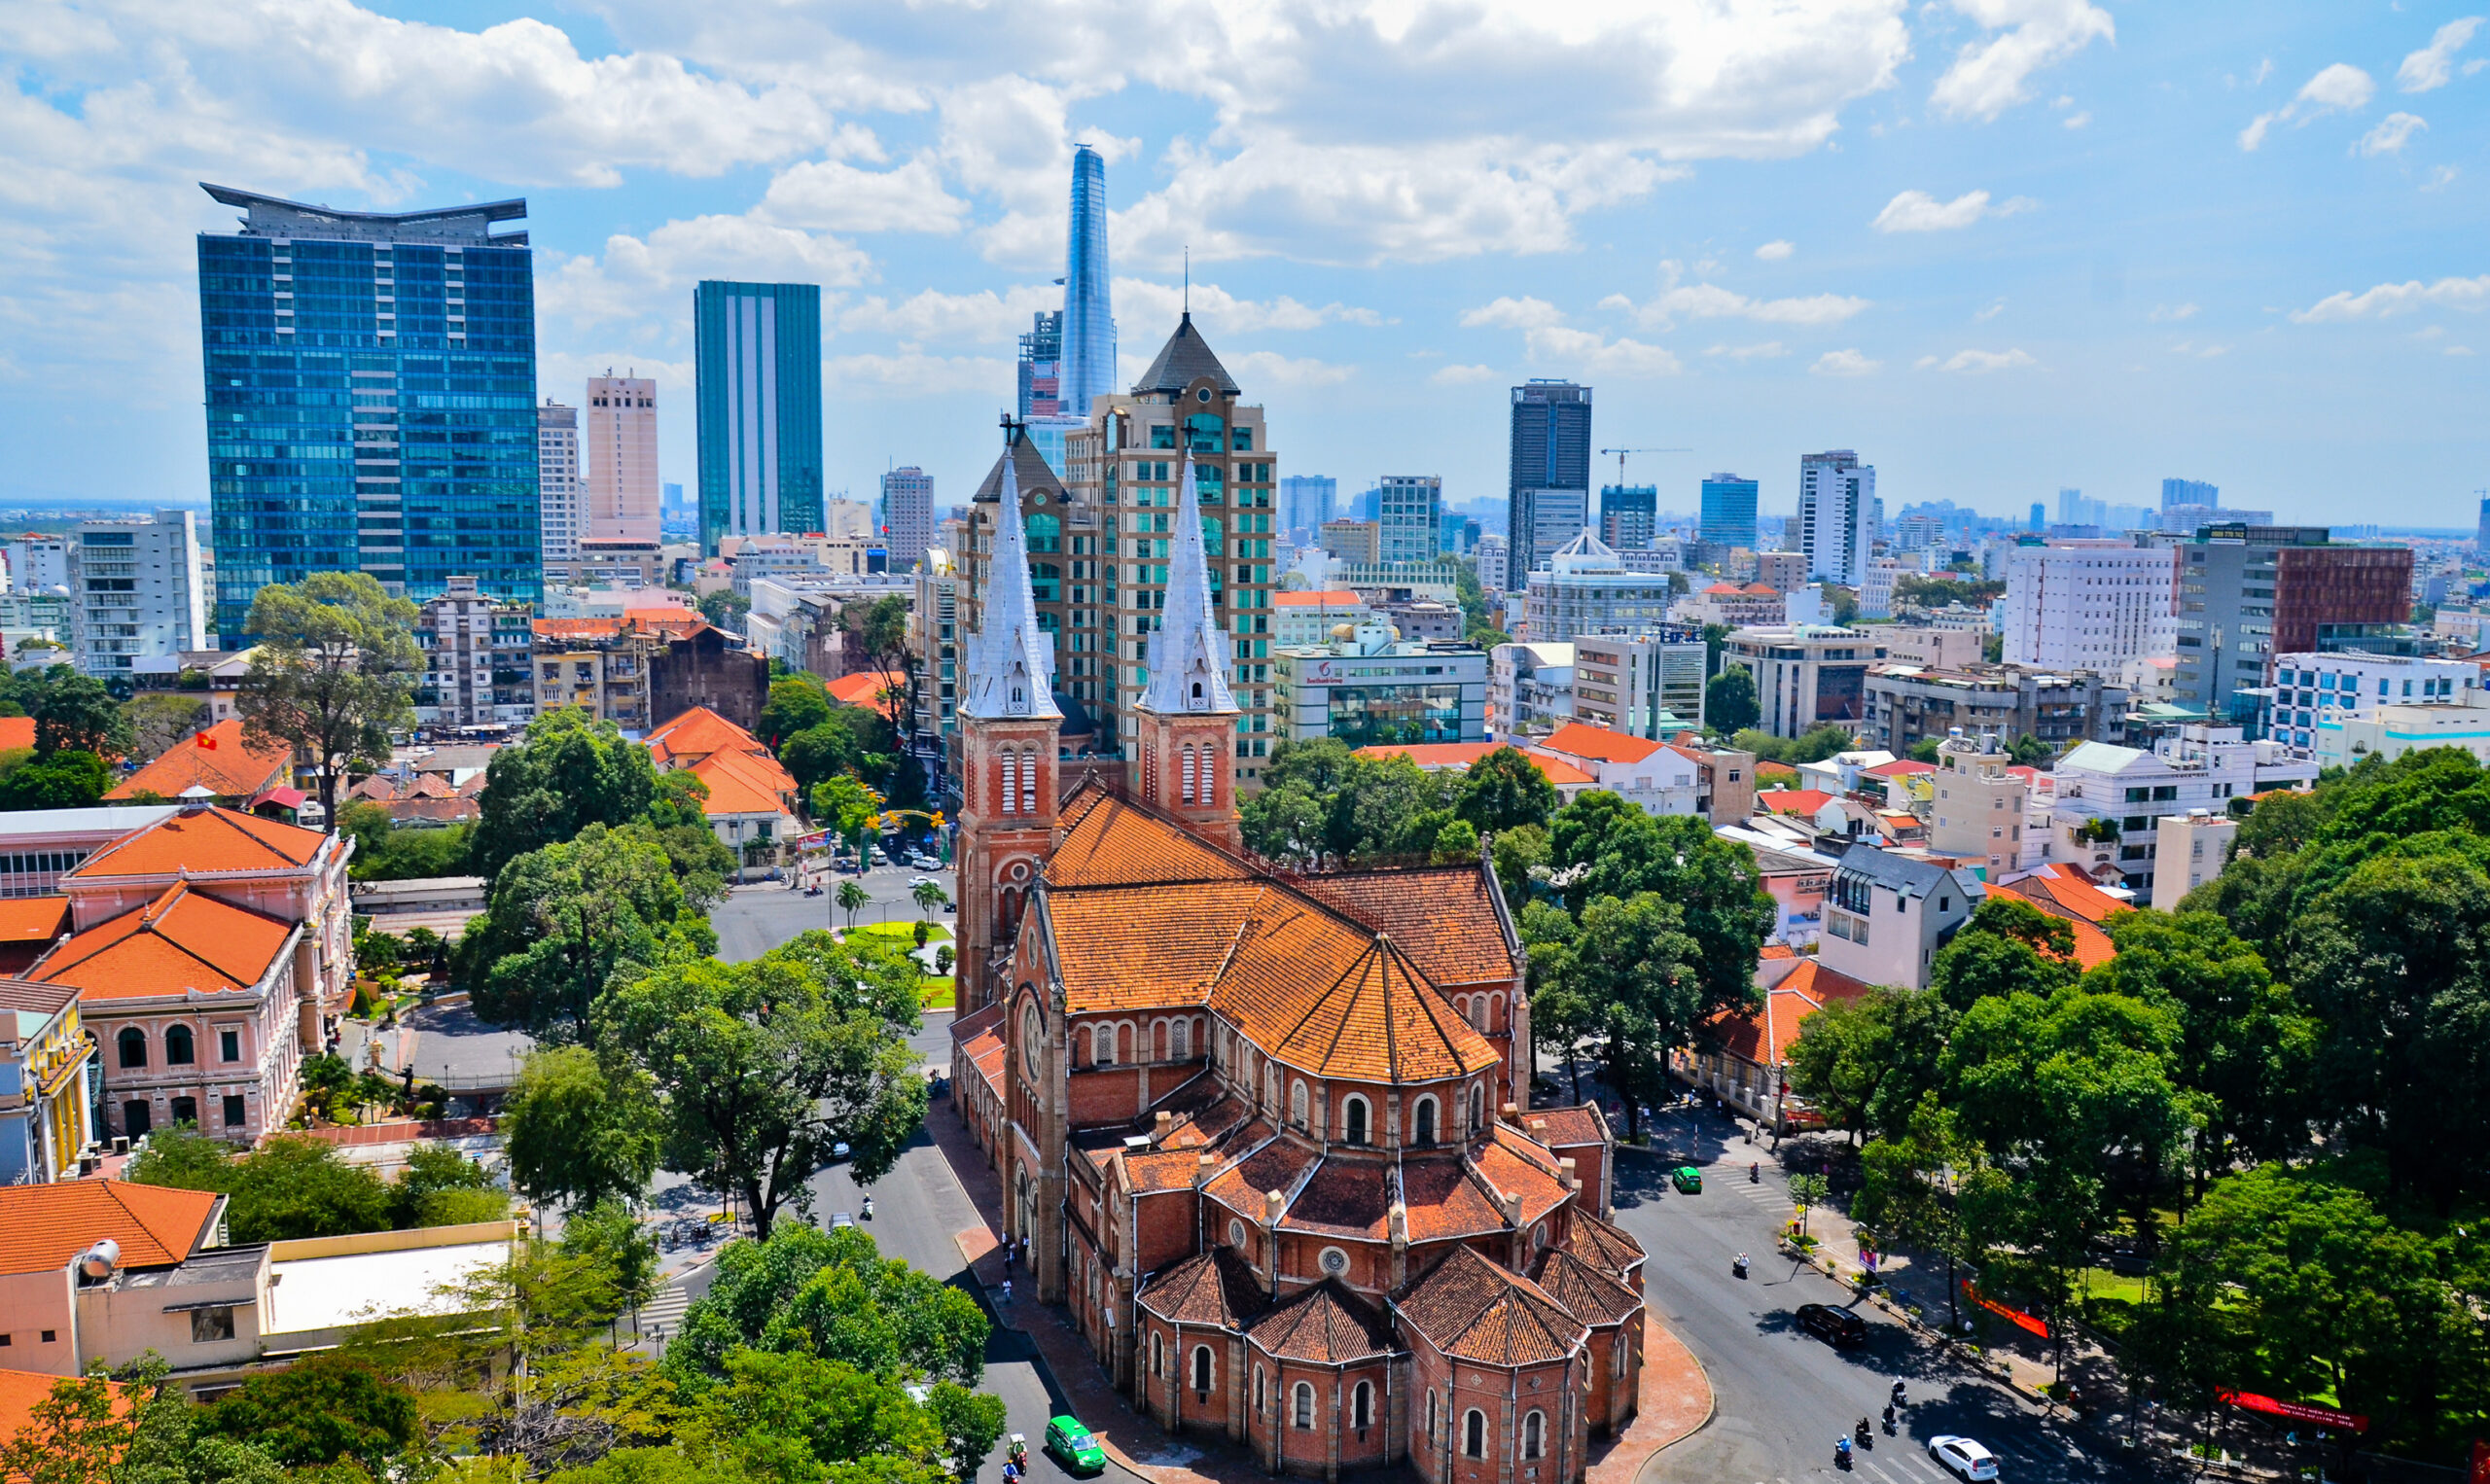 Marvel at the Beauty of Notre Dame Cathedral Saigon